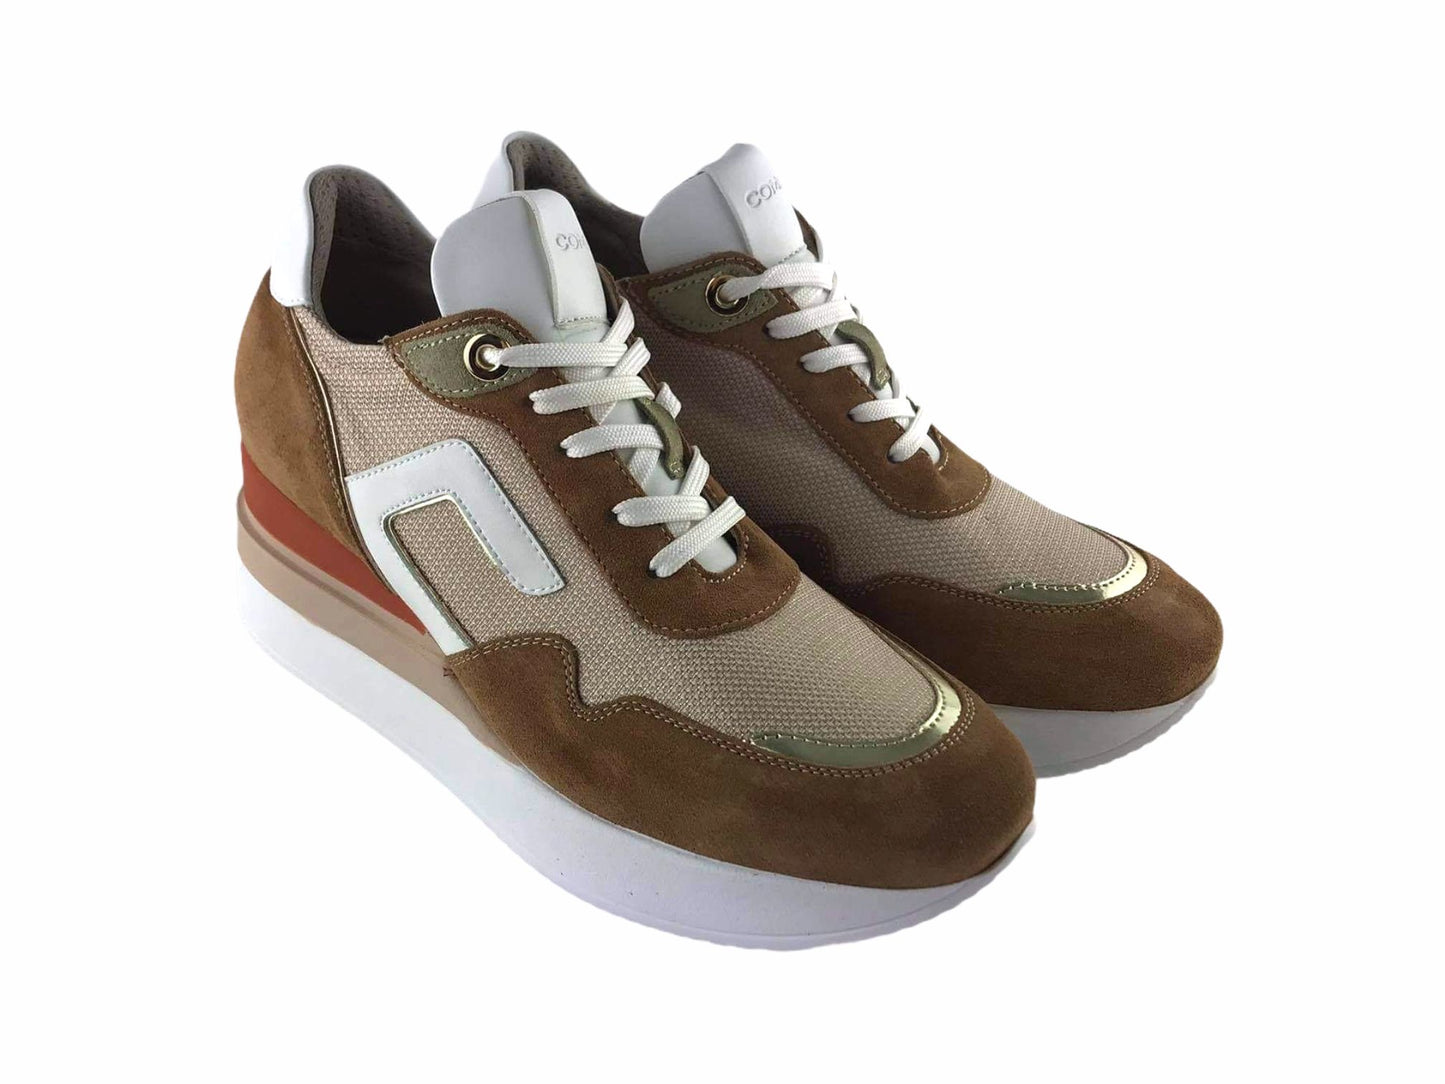 Commart | Cuore Fantasy Sneakers Shoes